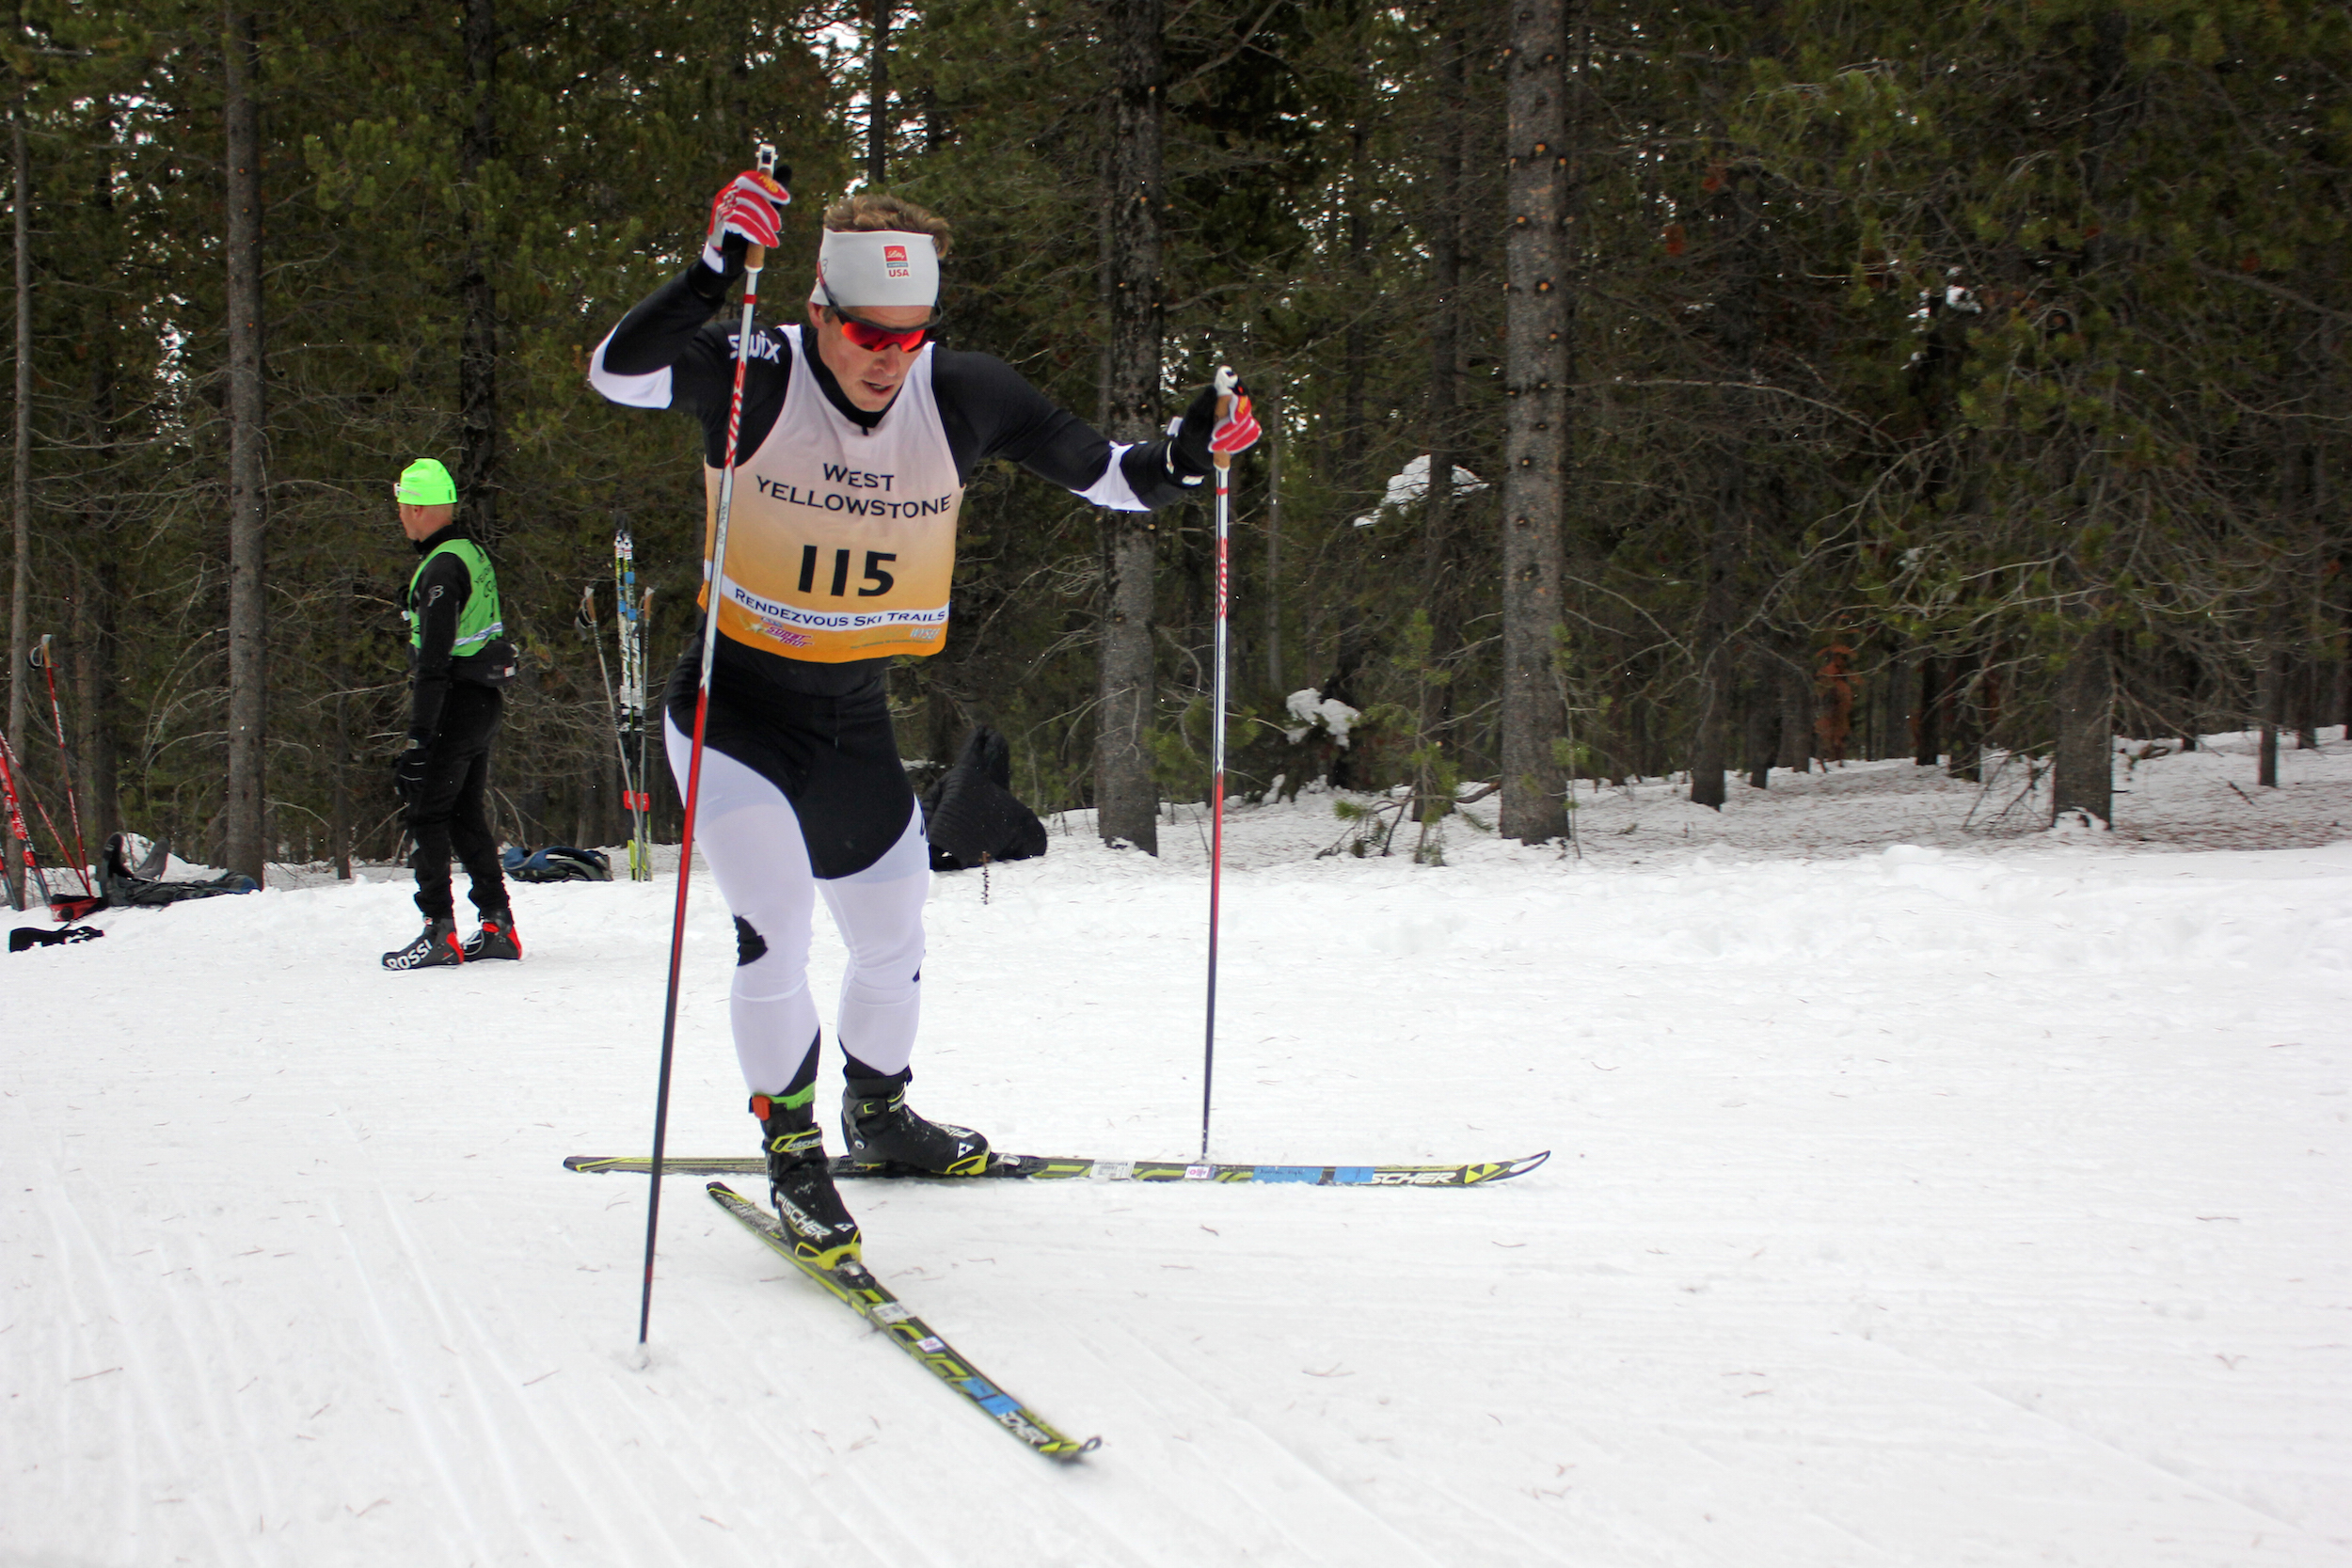 Kris Freeman had a strong first lap in West Yellowstone but ultimately finished fourth in the SuperTour 15 k freestyle. 